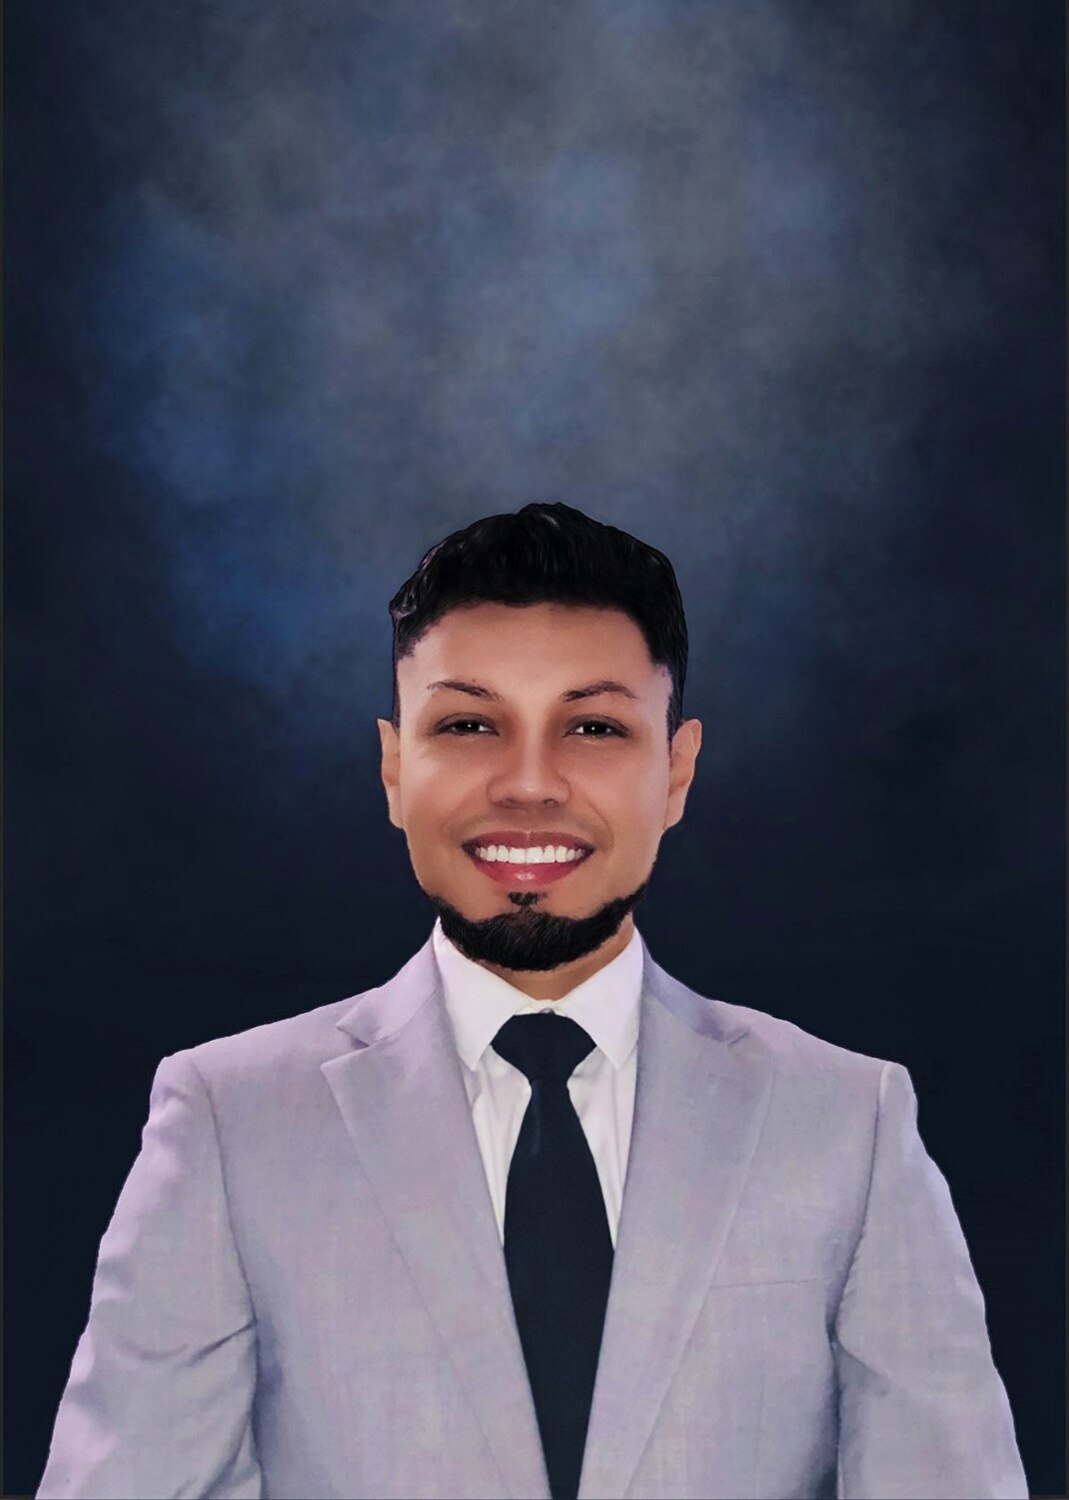 ANGEL G. TORRES Financial Professional & Insurance Agent